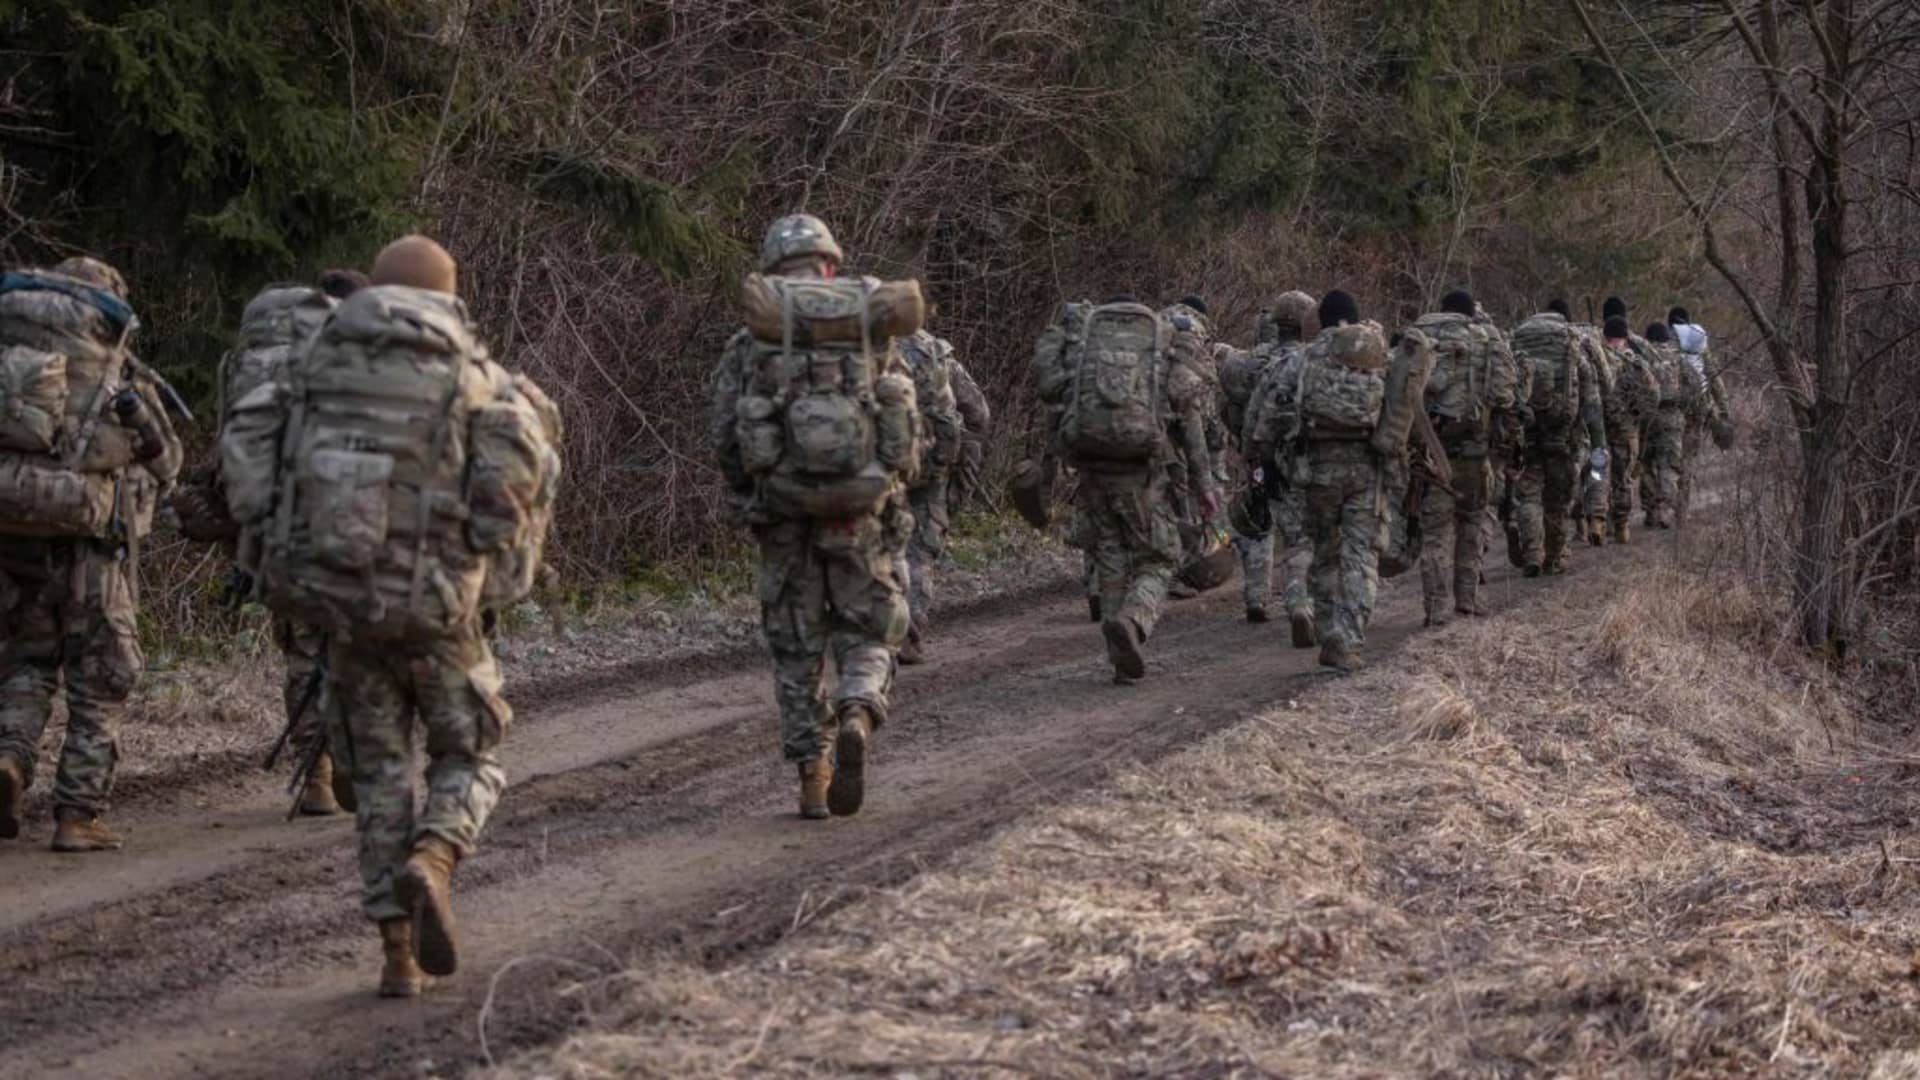 US soldiers are seen near a military camp in Arlamow, southeastern Poland, near the border with Ukraine, on March 3, 2022.